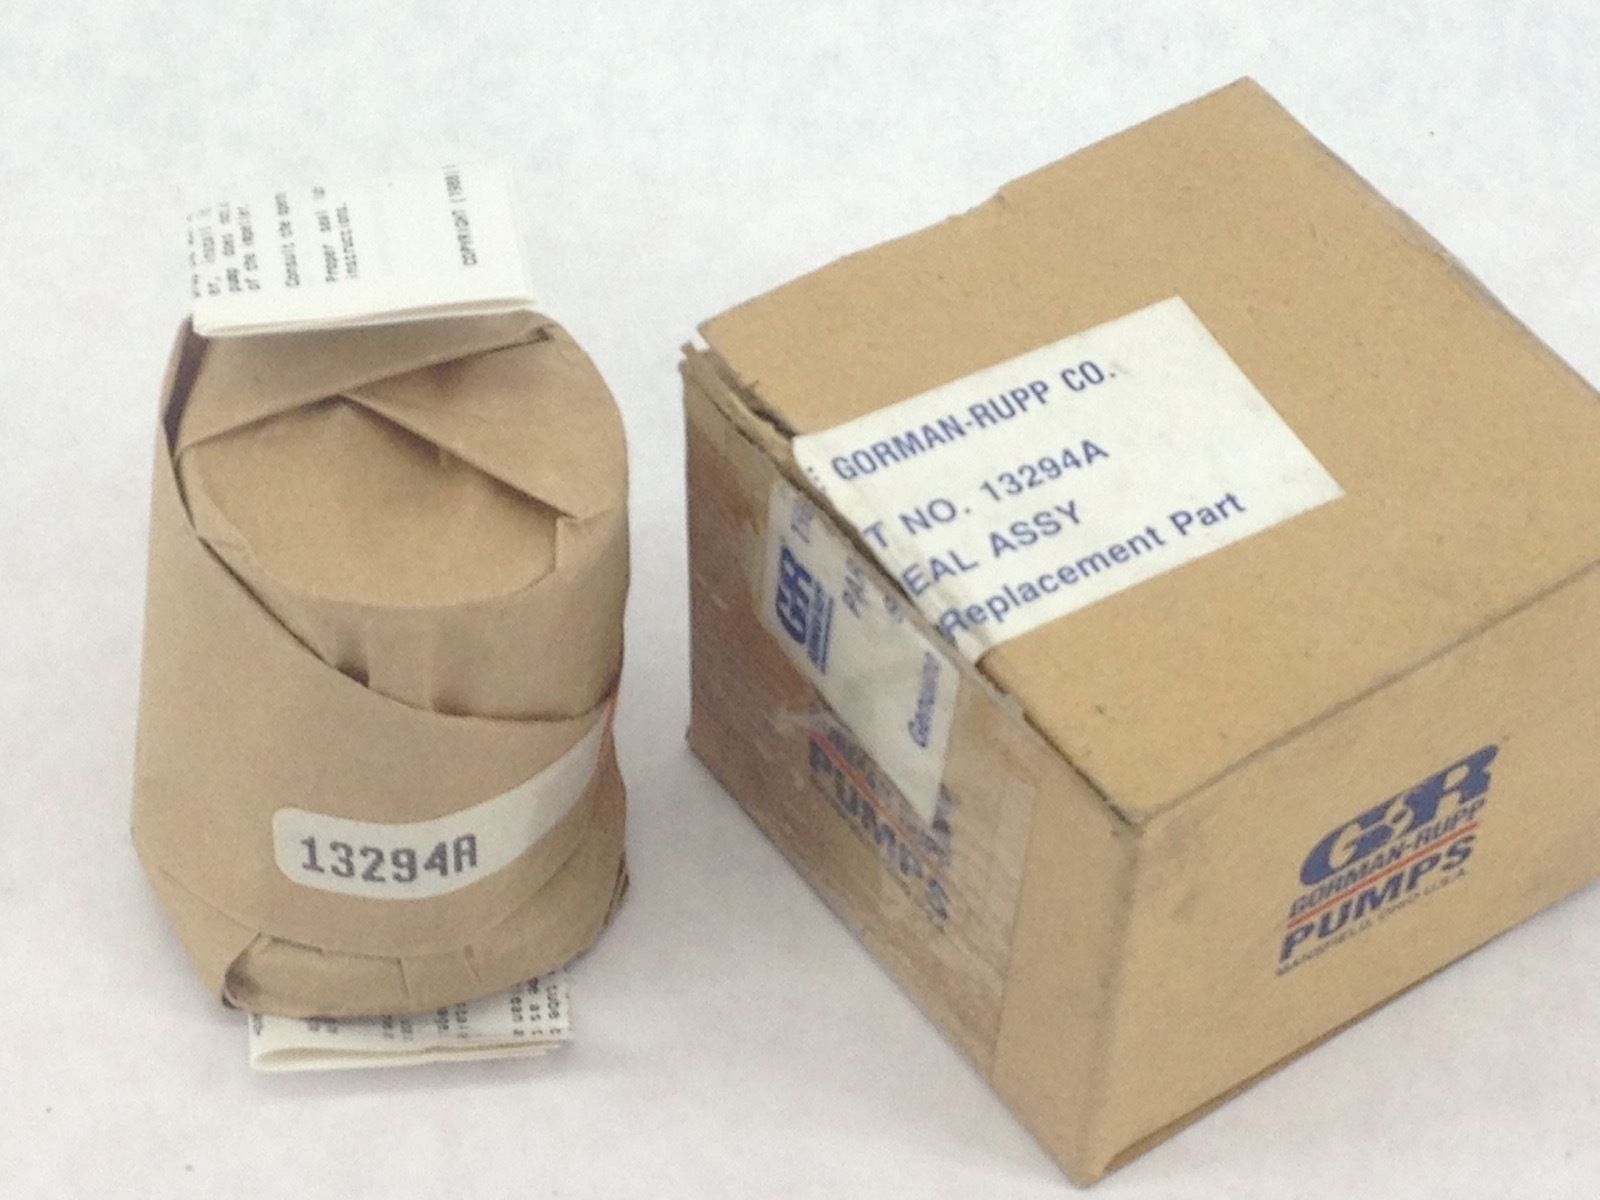 NEW FACTORY SEALED! GENUINE GORMAN-RUPP 13294A SEAL ASSEMBLY FAST SHIP!!! (A103) 3